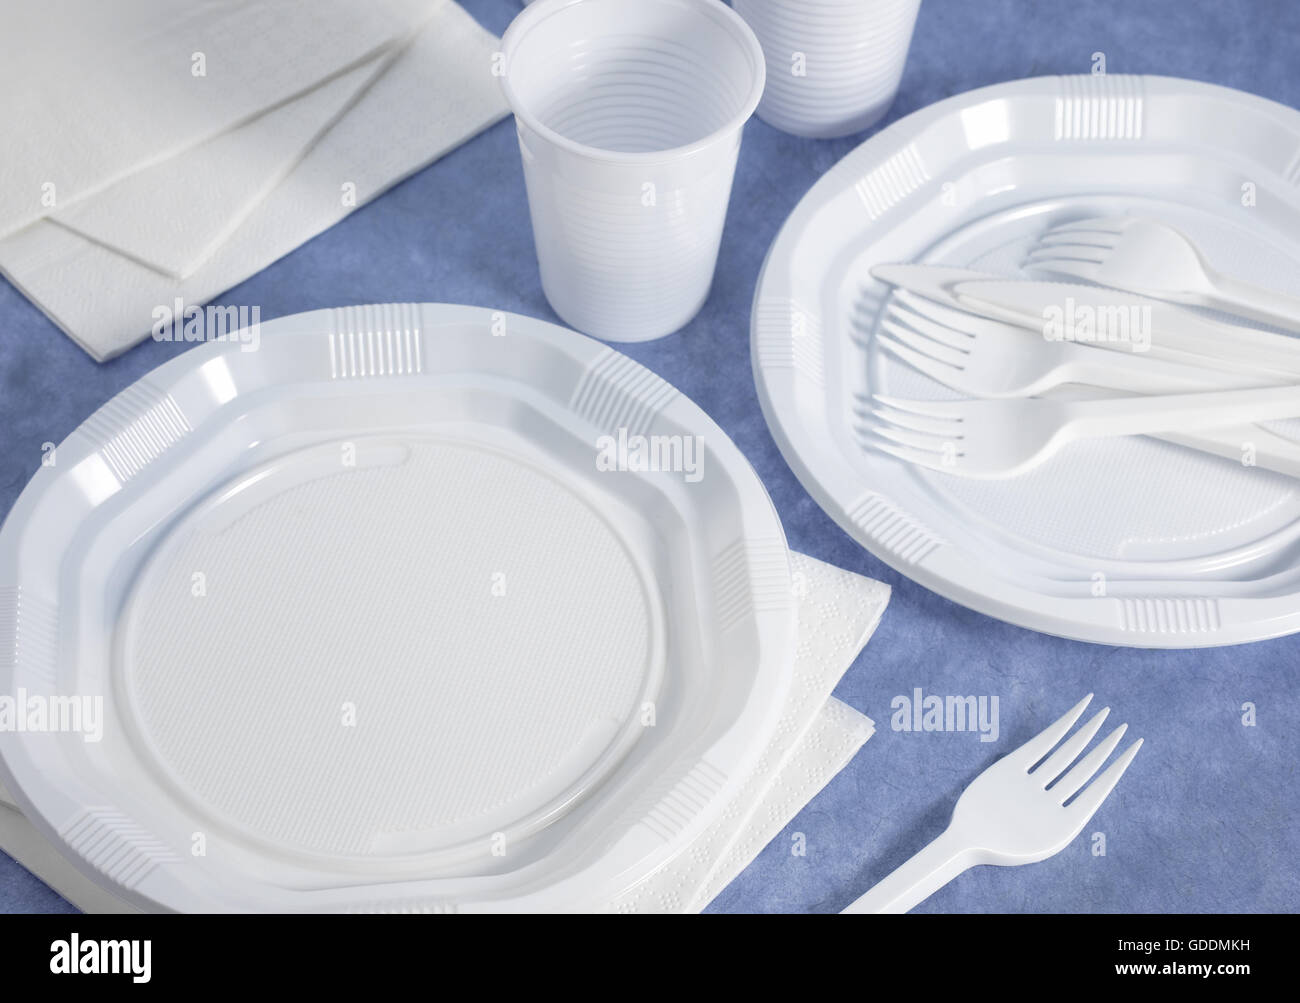 PLASTIC PLACE SETTING AND PAPER NAPKIN Stock Photo